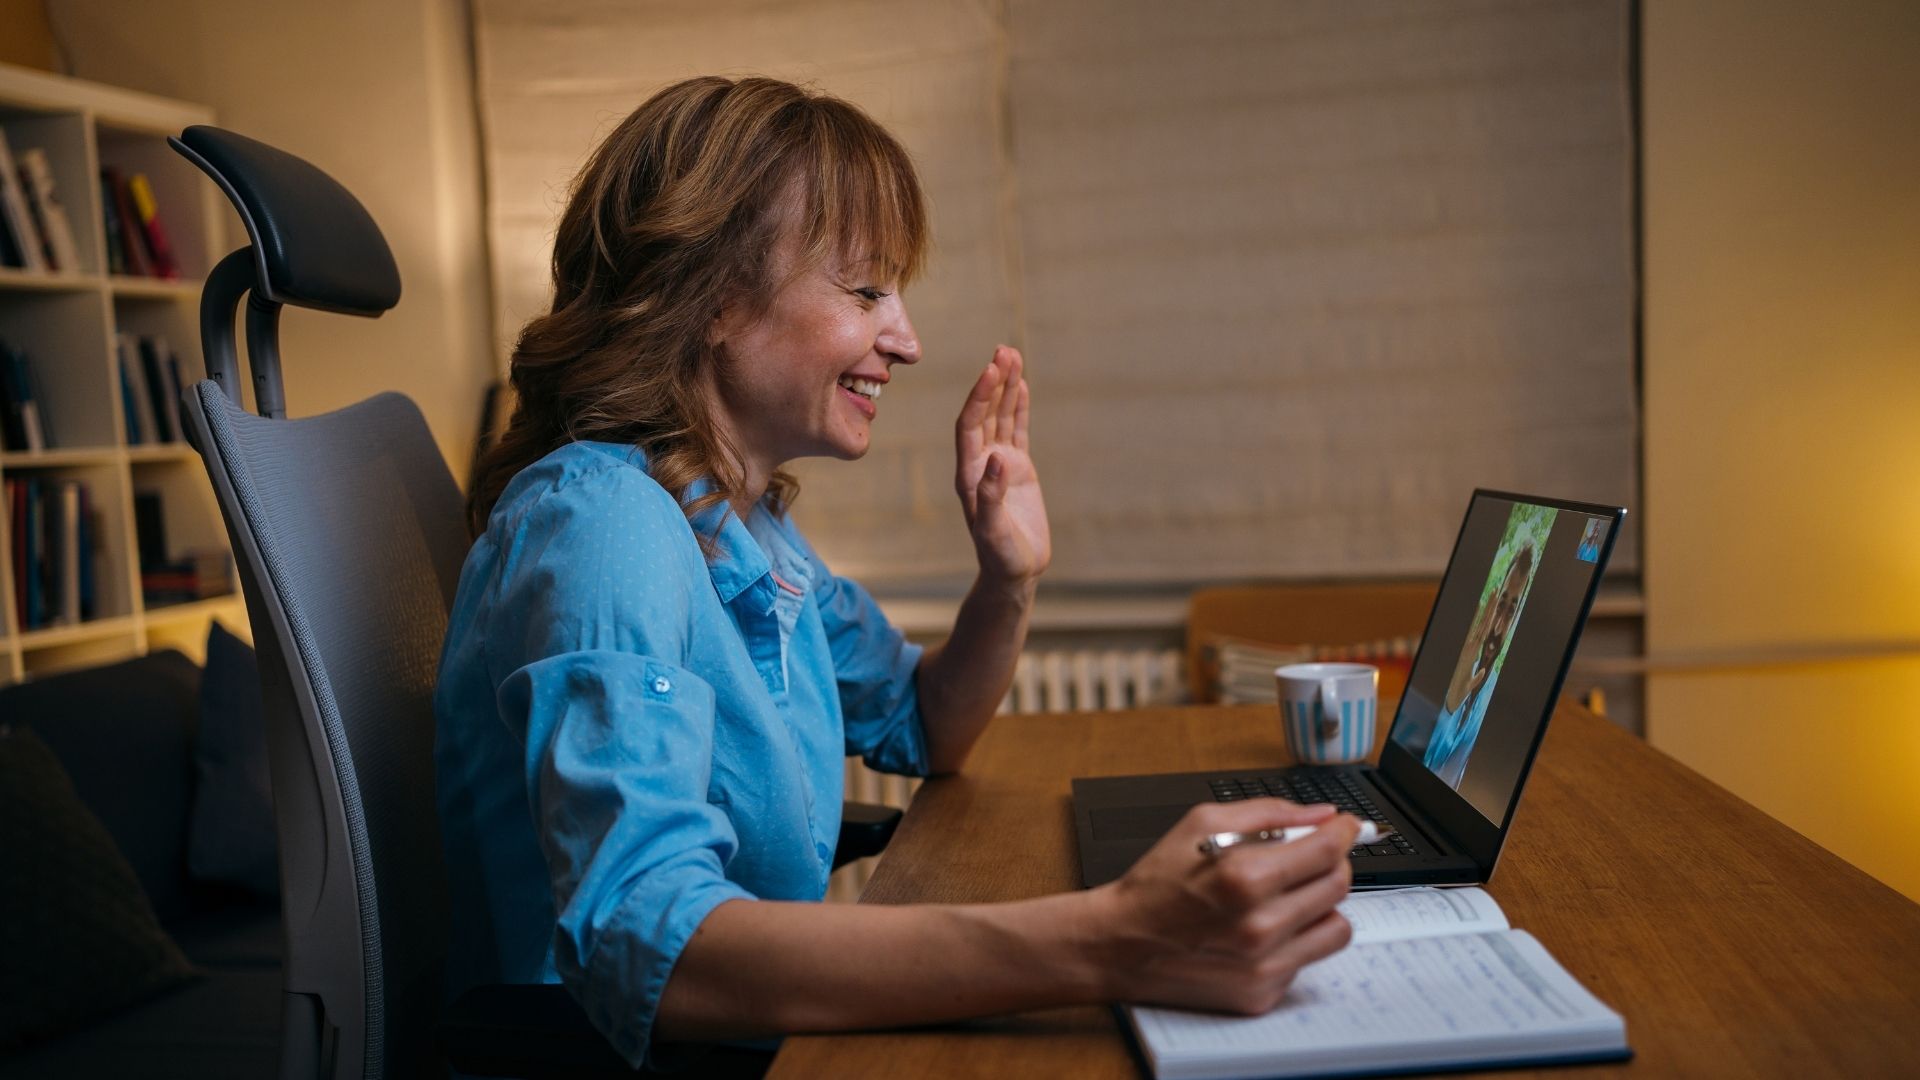 smiling woman waves during an online meeting